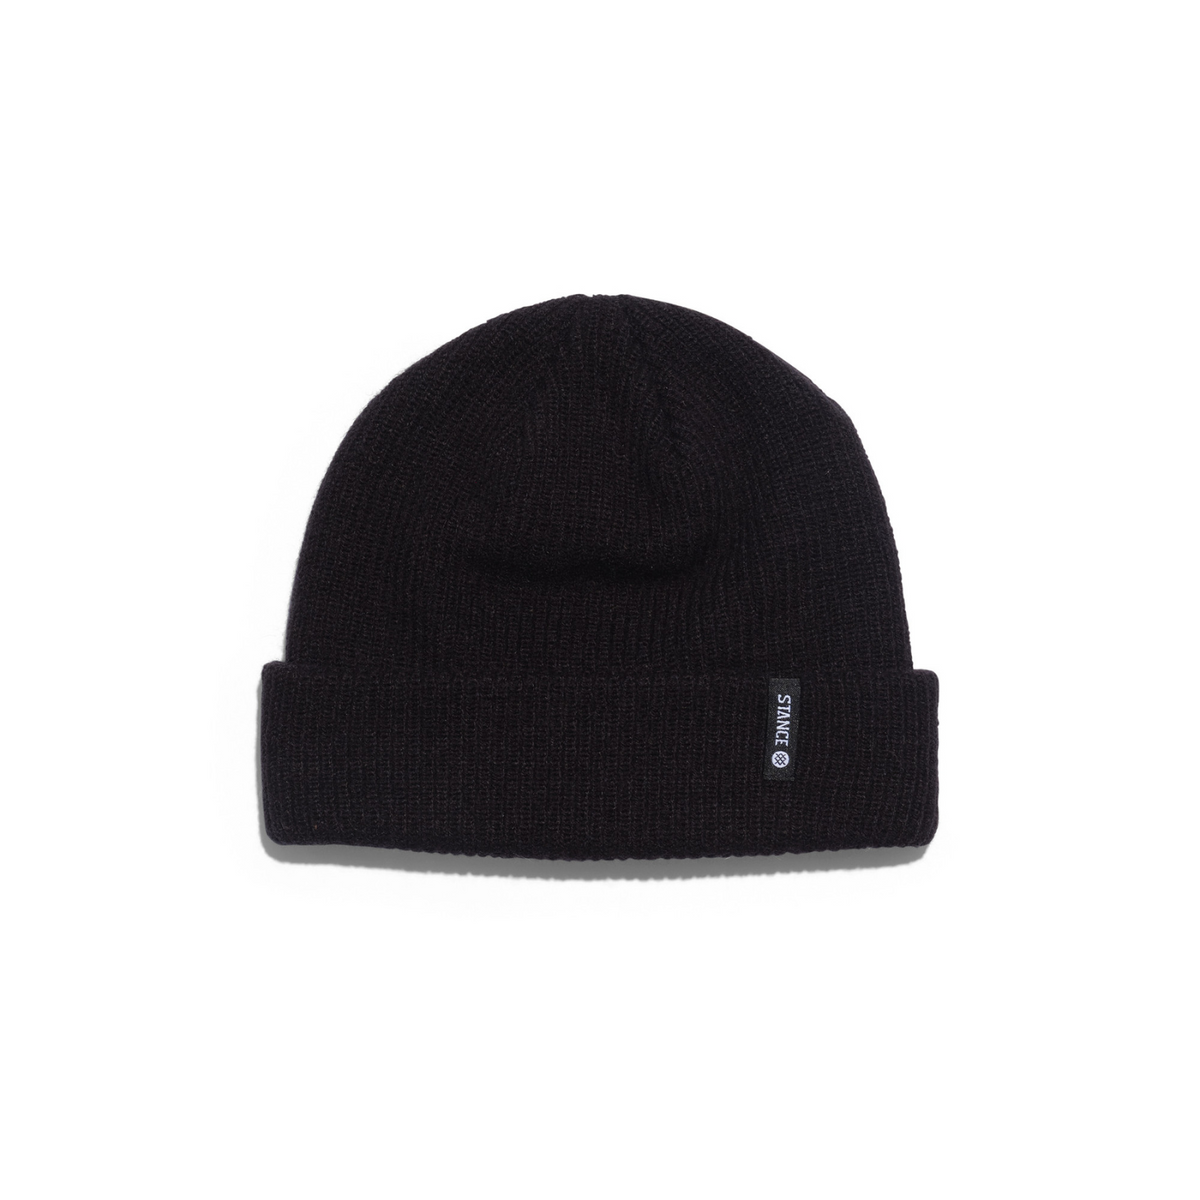 Stance Icon 2 Beanie in black on display